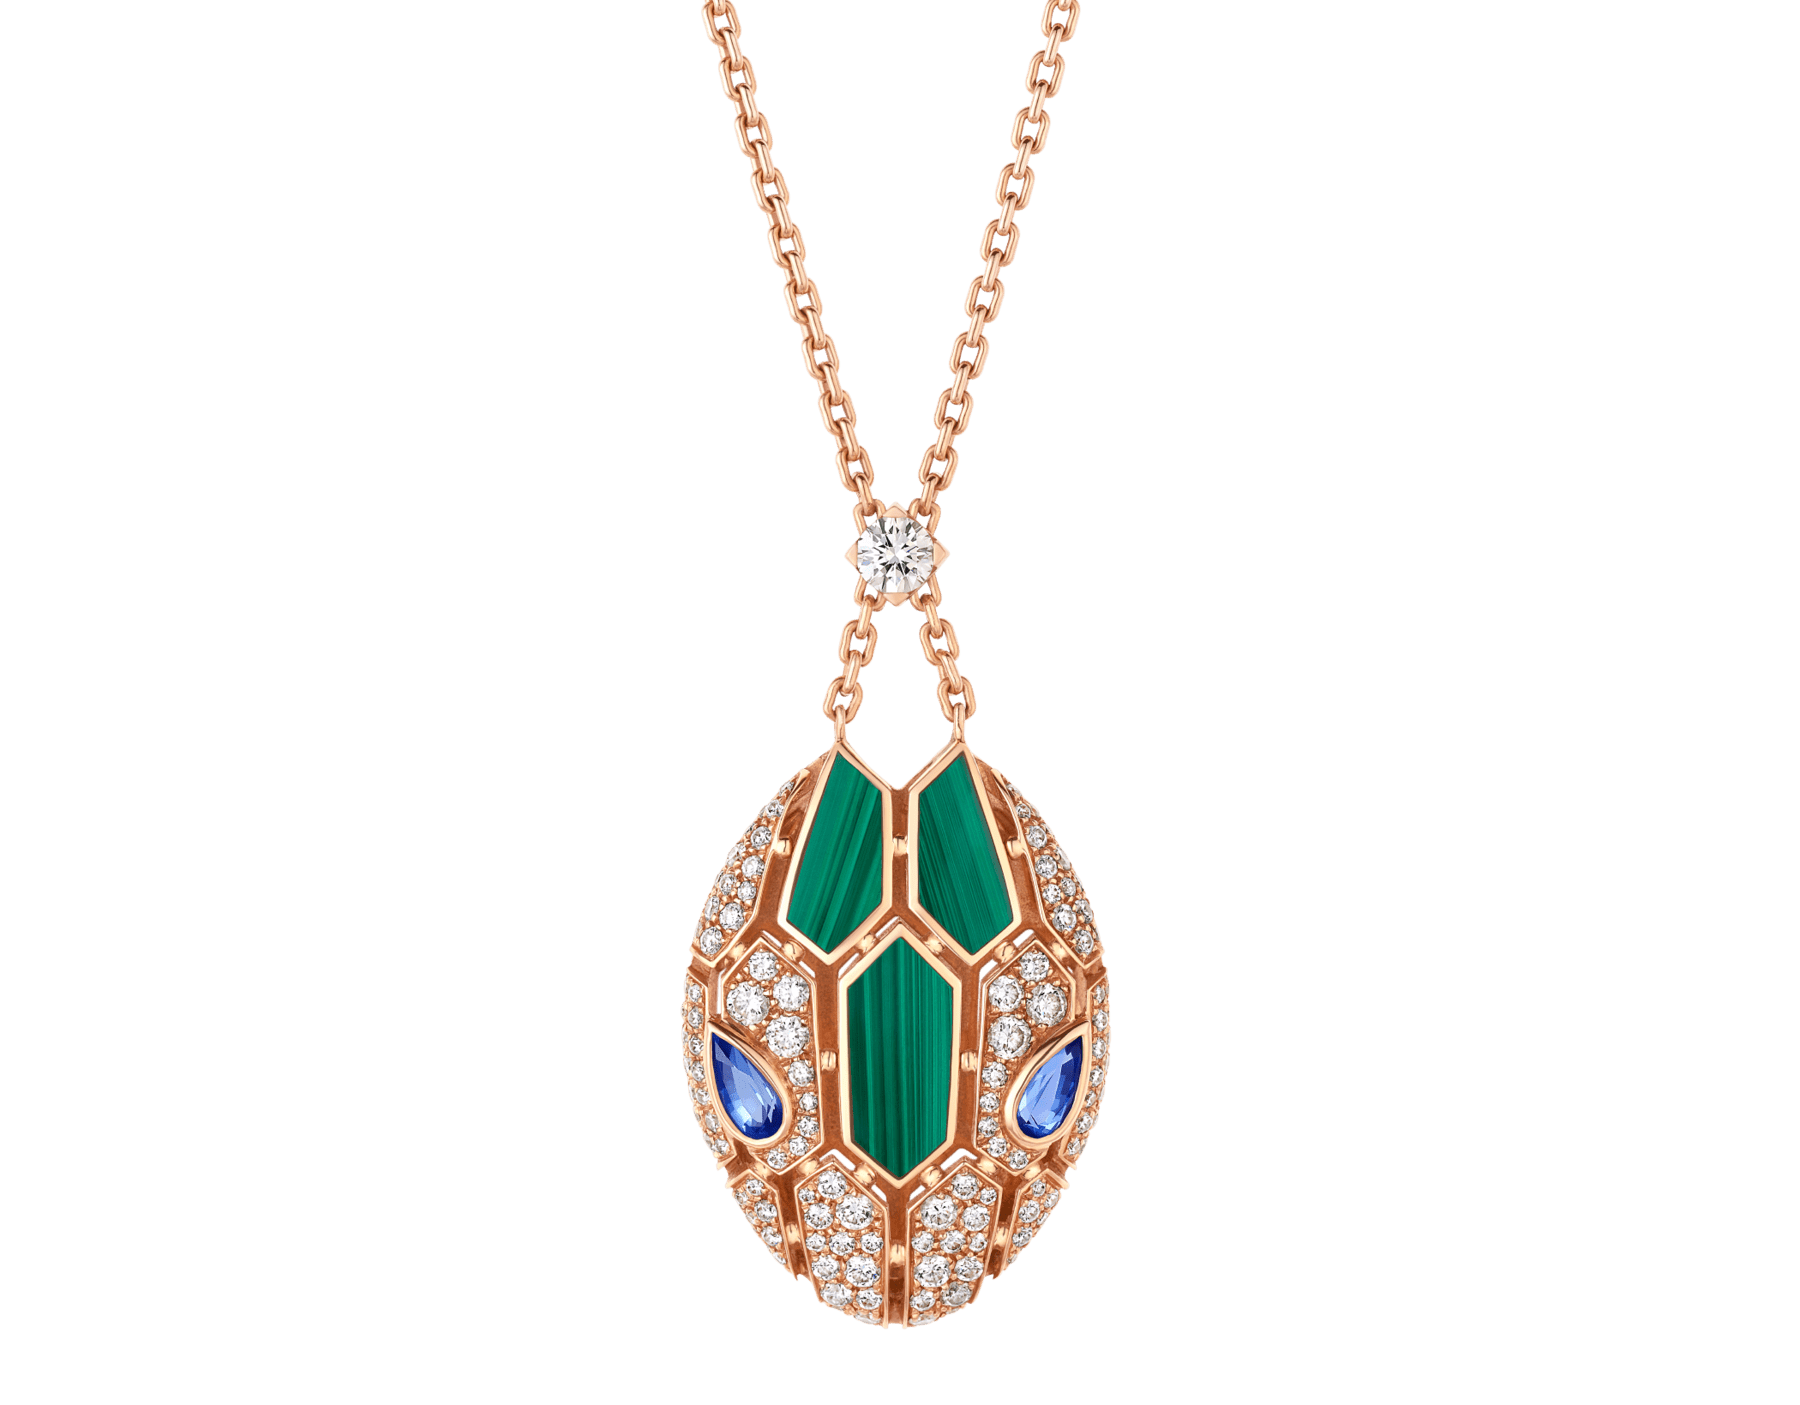 White gold Serpenti Necklace with 4.99 ct Diamonds | Bulgari Official Store